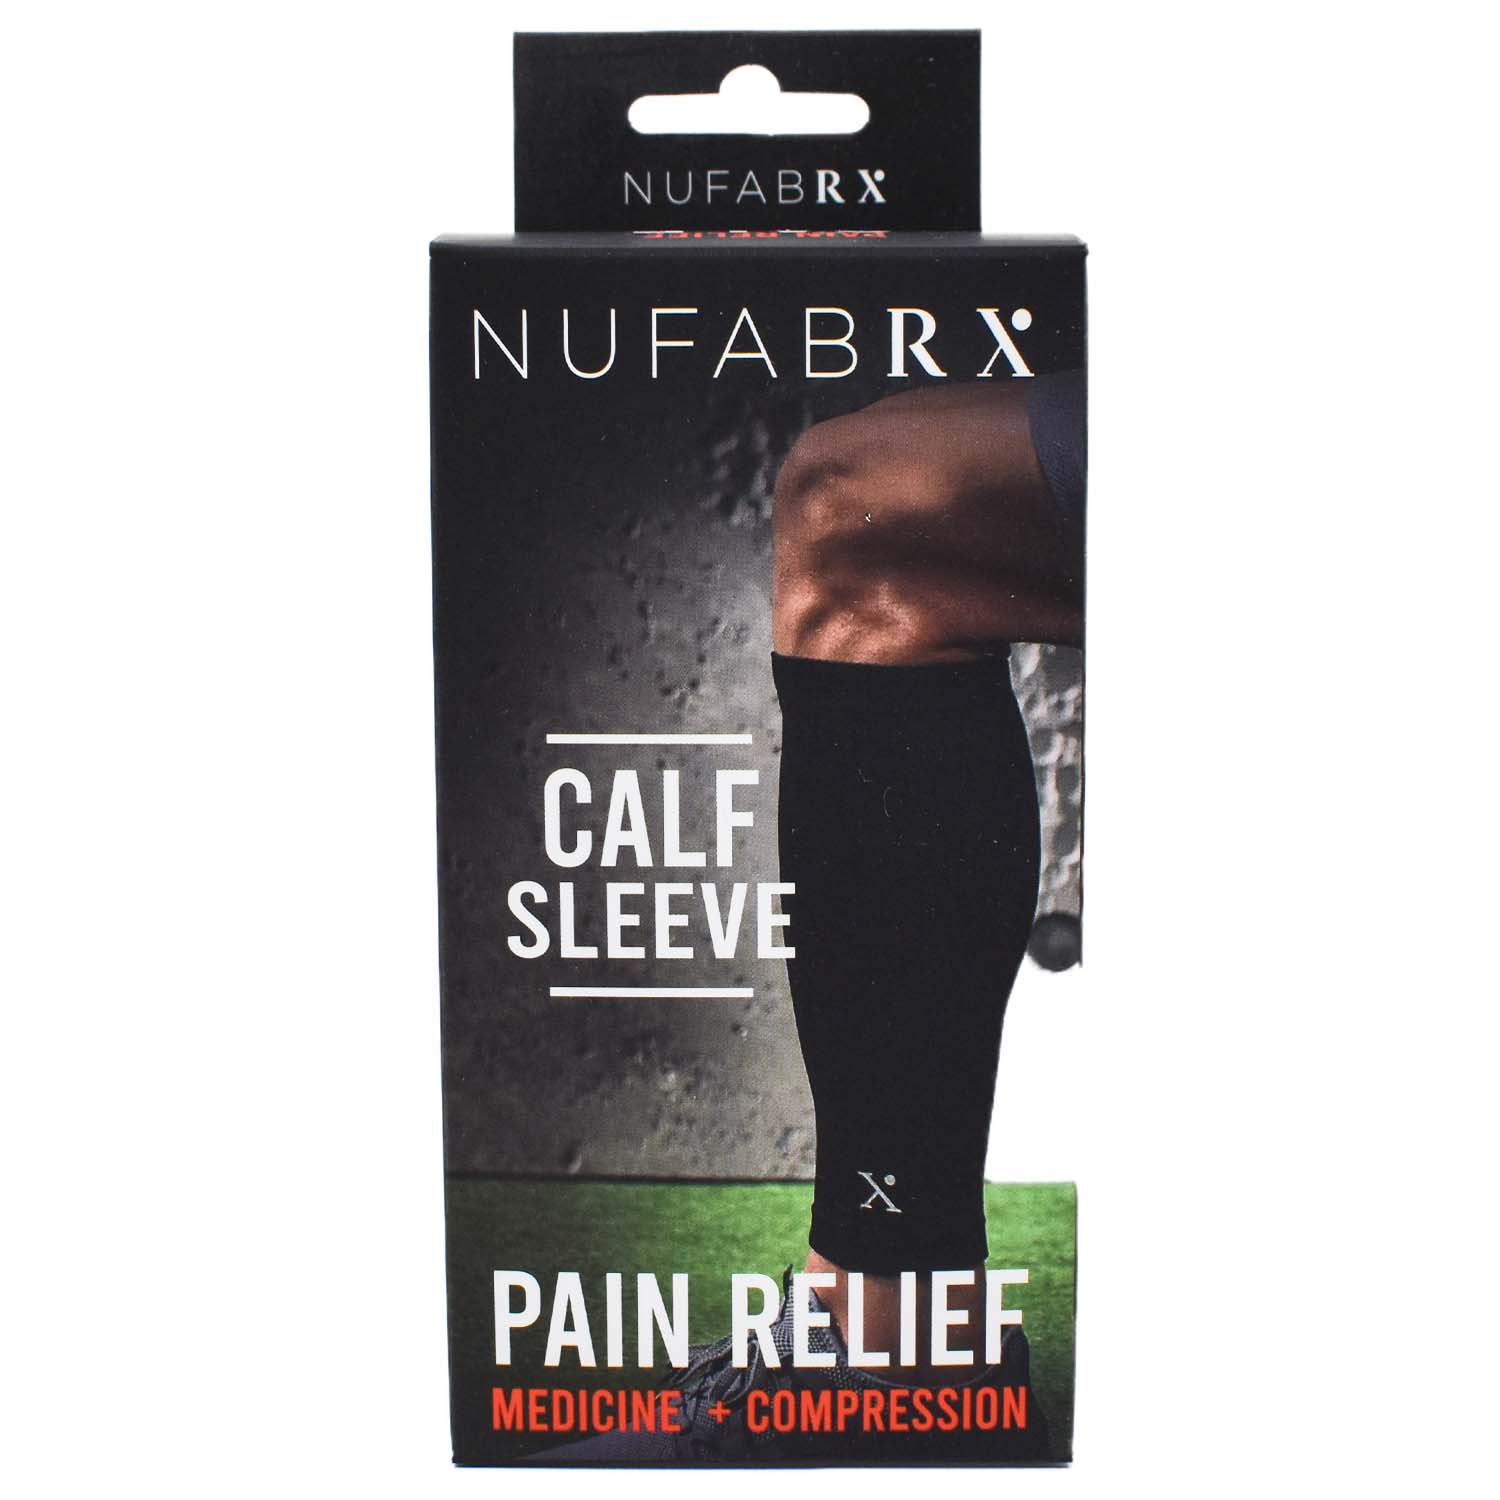 Nufabrx Pain Relieving Medicine + Compression Calf  Sleeve